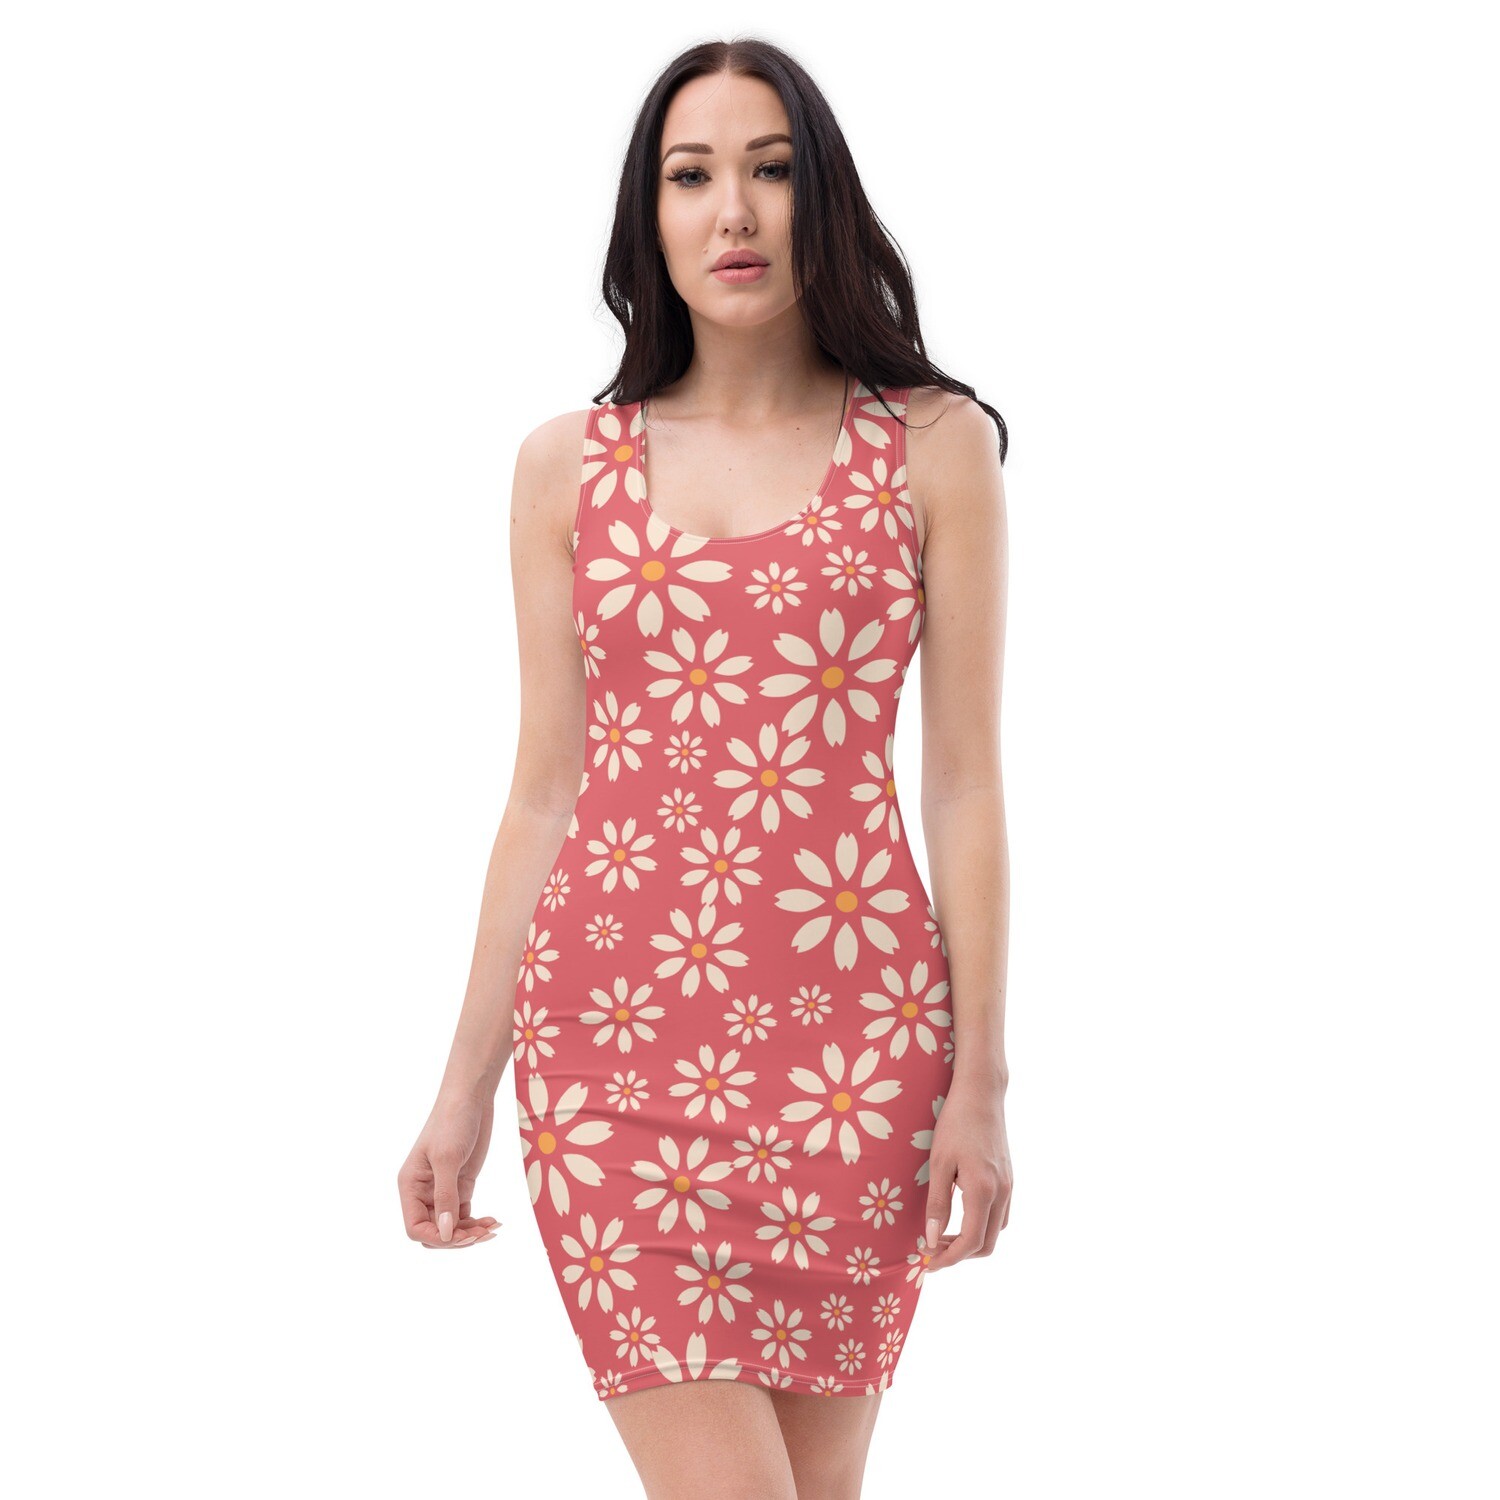 Retro red floral bodycon dress in sizes XS-XL